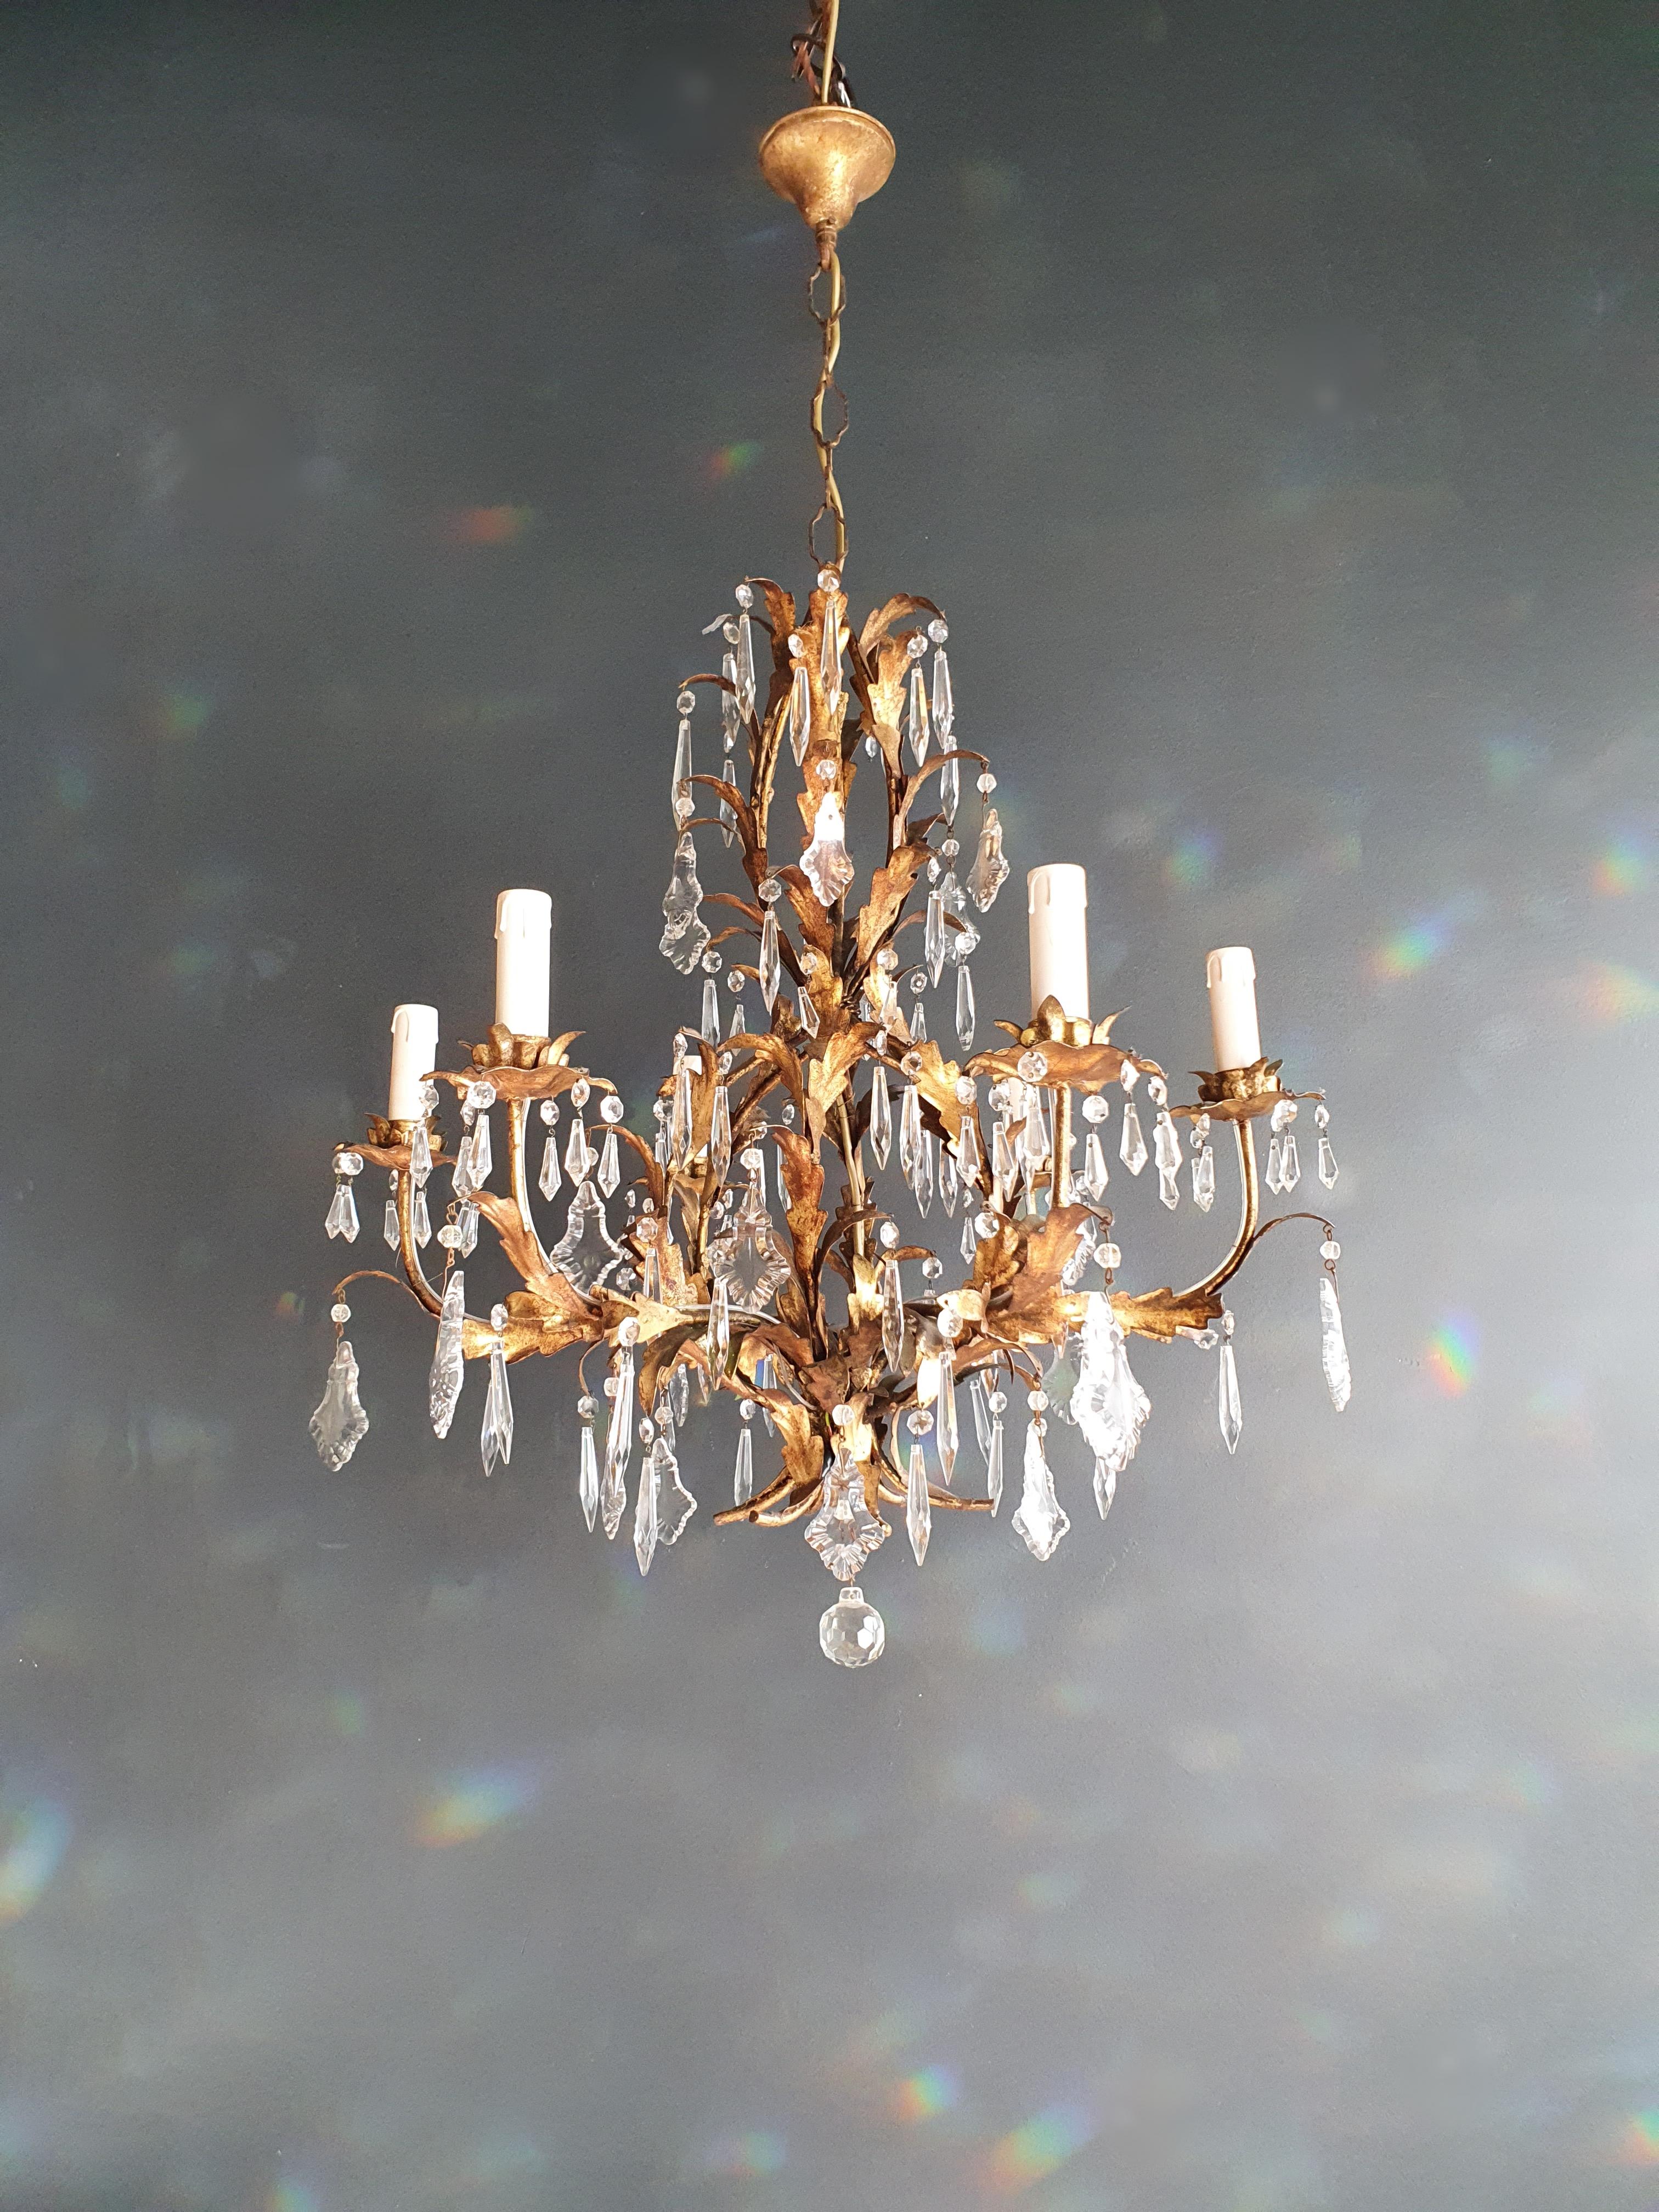 Antique Crystal Candelabrum Chandelier: Revived Elegance in Art Nouveau Splendor

Illuminate your space with the timeless allure of our Antique Crystal Candelabrum Chandelier, meticulously restored and redesigned to harmonize with modern